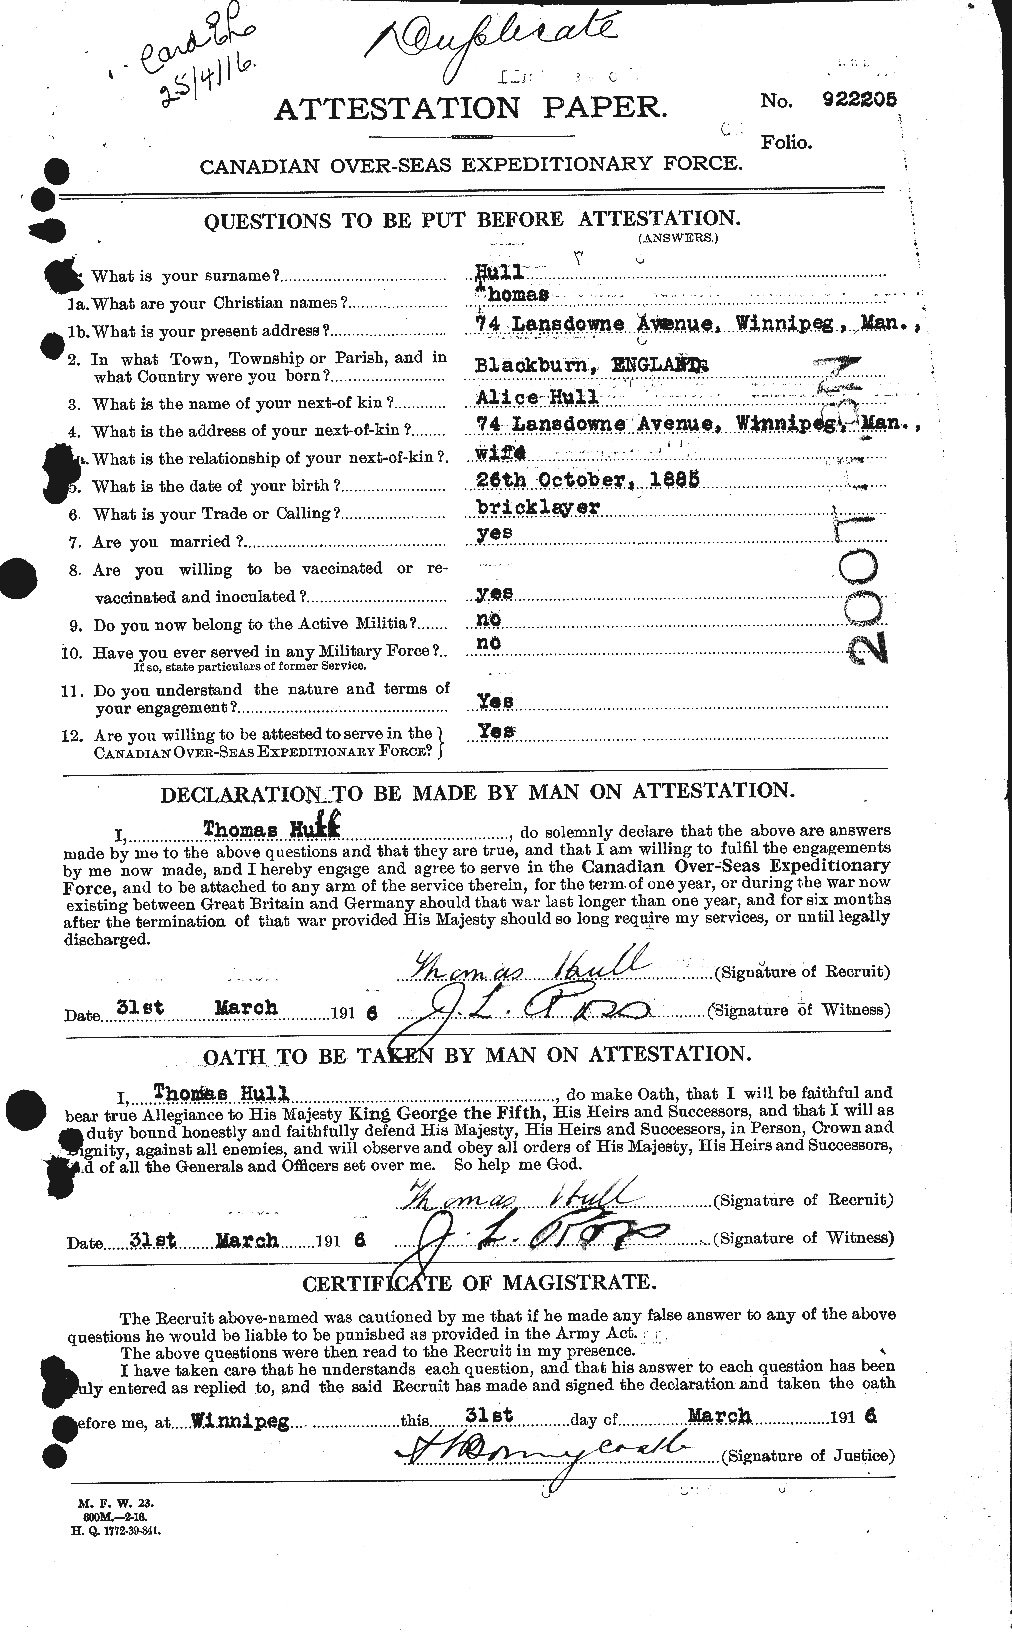 Personnel Records of the First World War - CEF 406155a